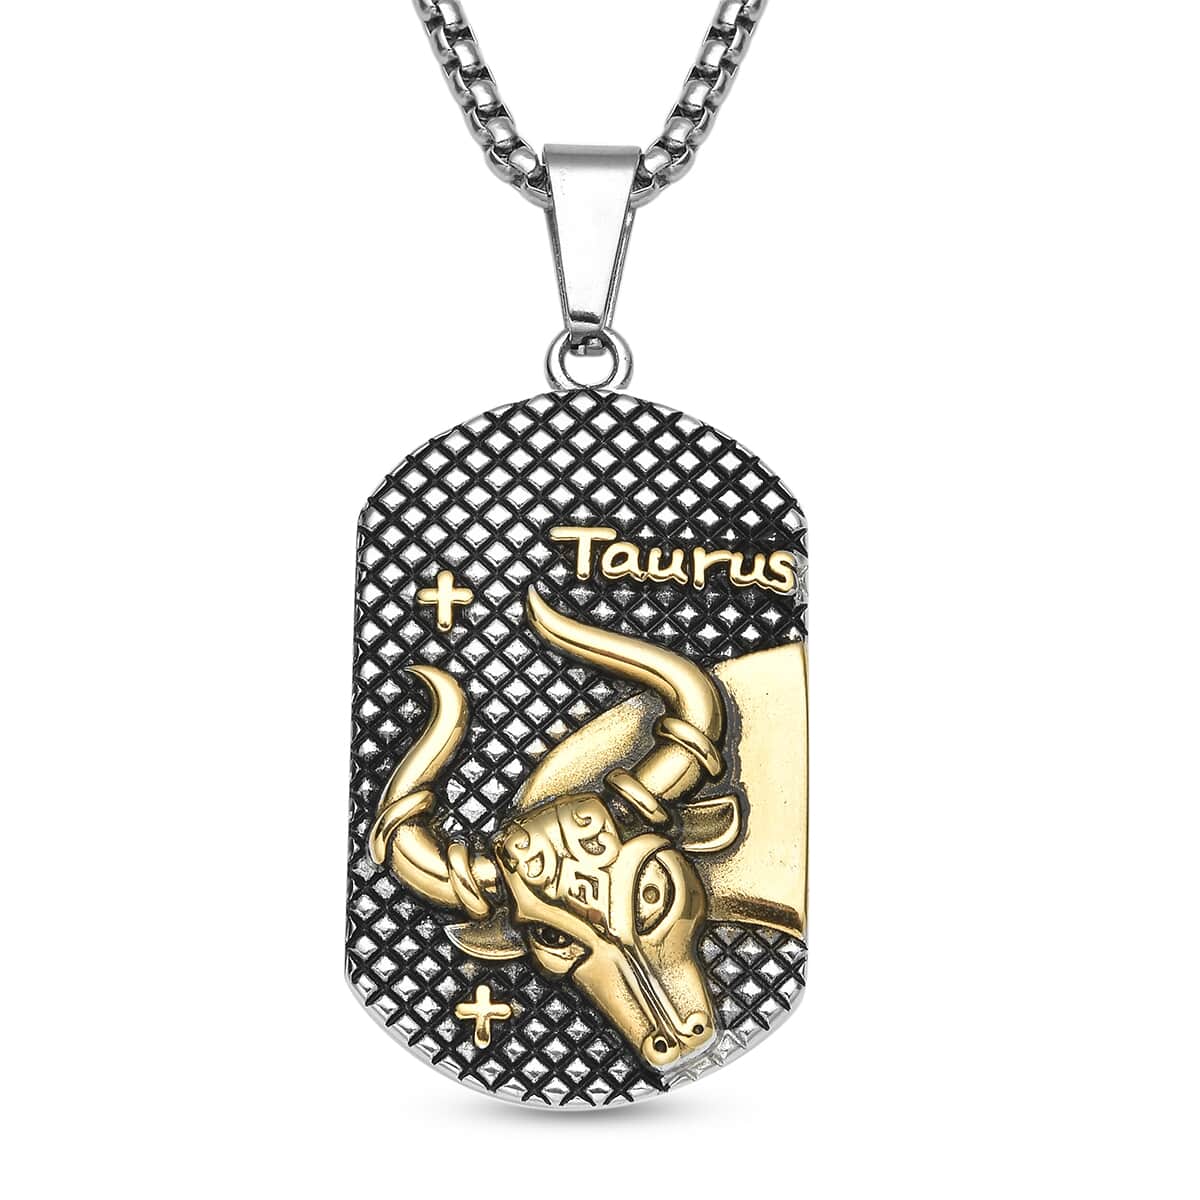 Taurus Dog Tag Jewelry Gift Box Pendant Necklace 23.5 Inches in ION Plated YG and Black Oxidized Stainless Steel image number 1